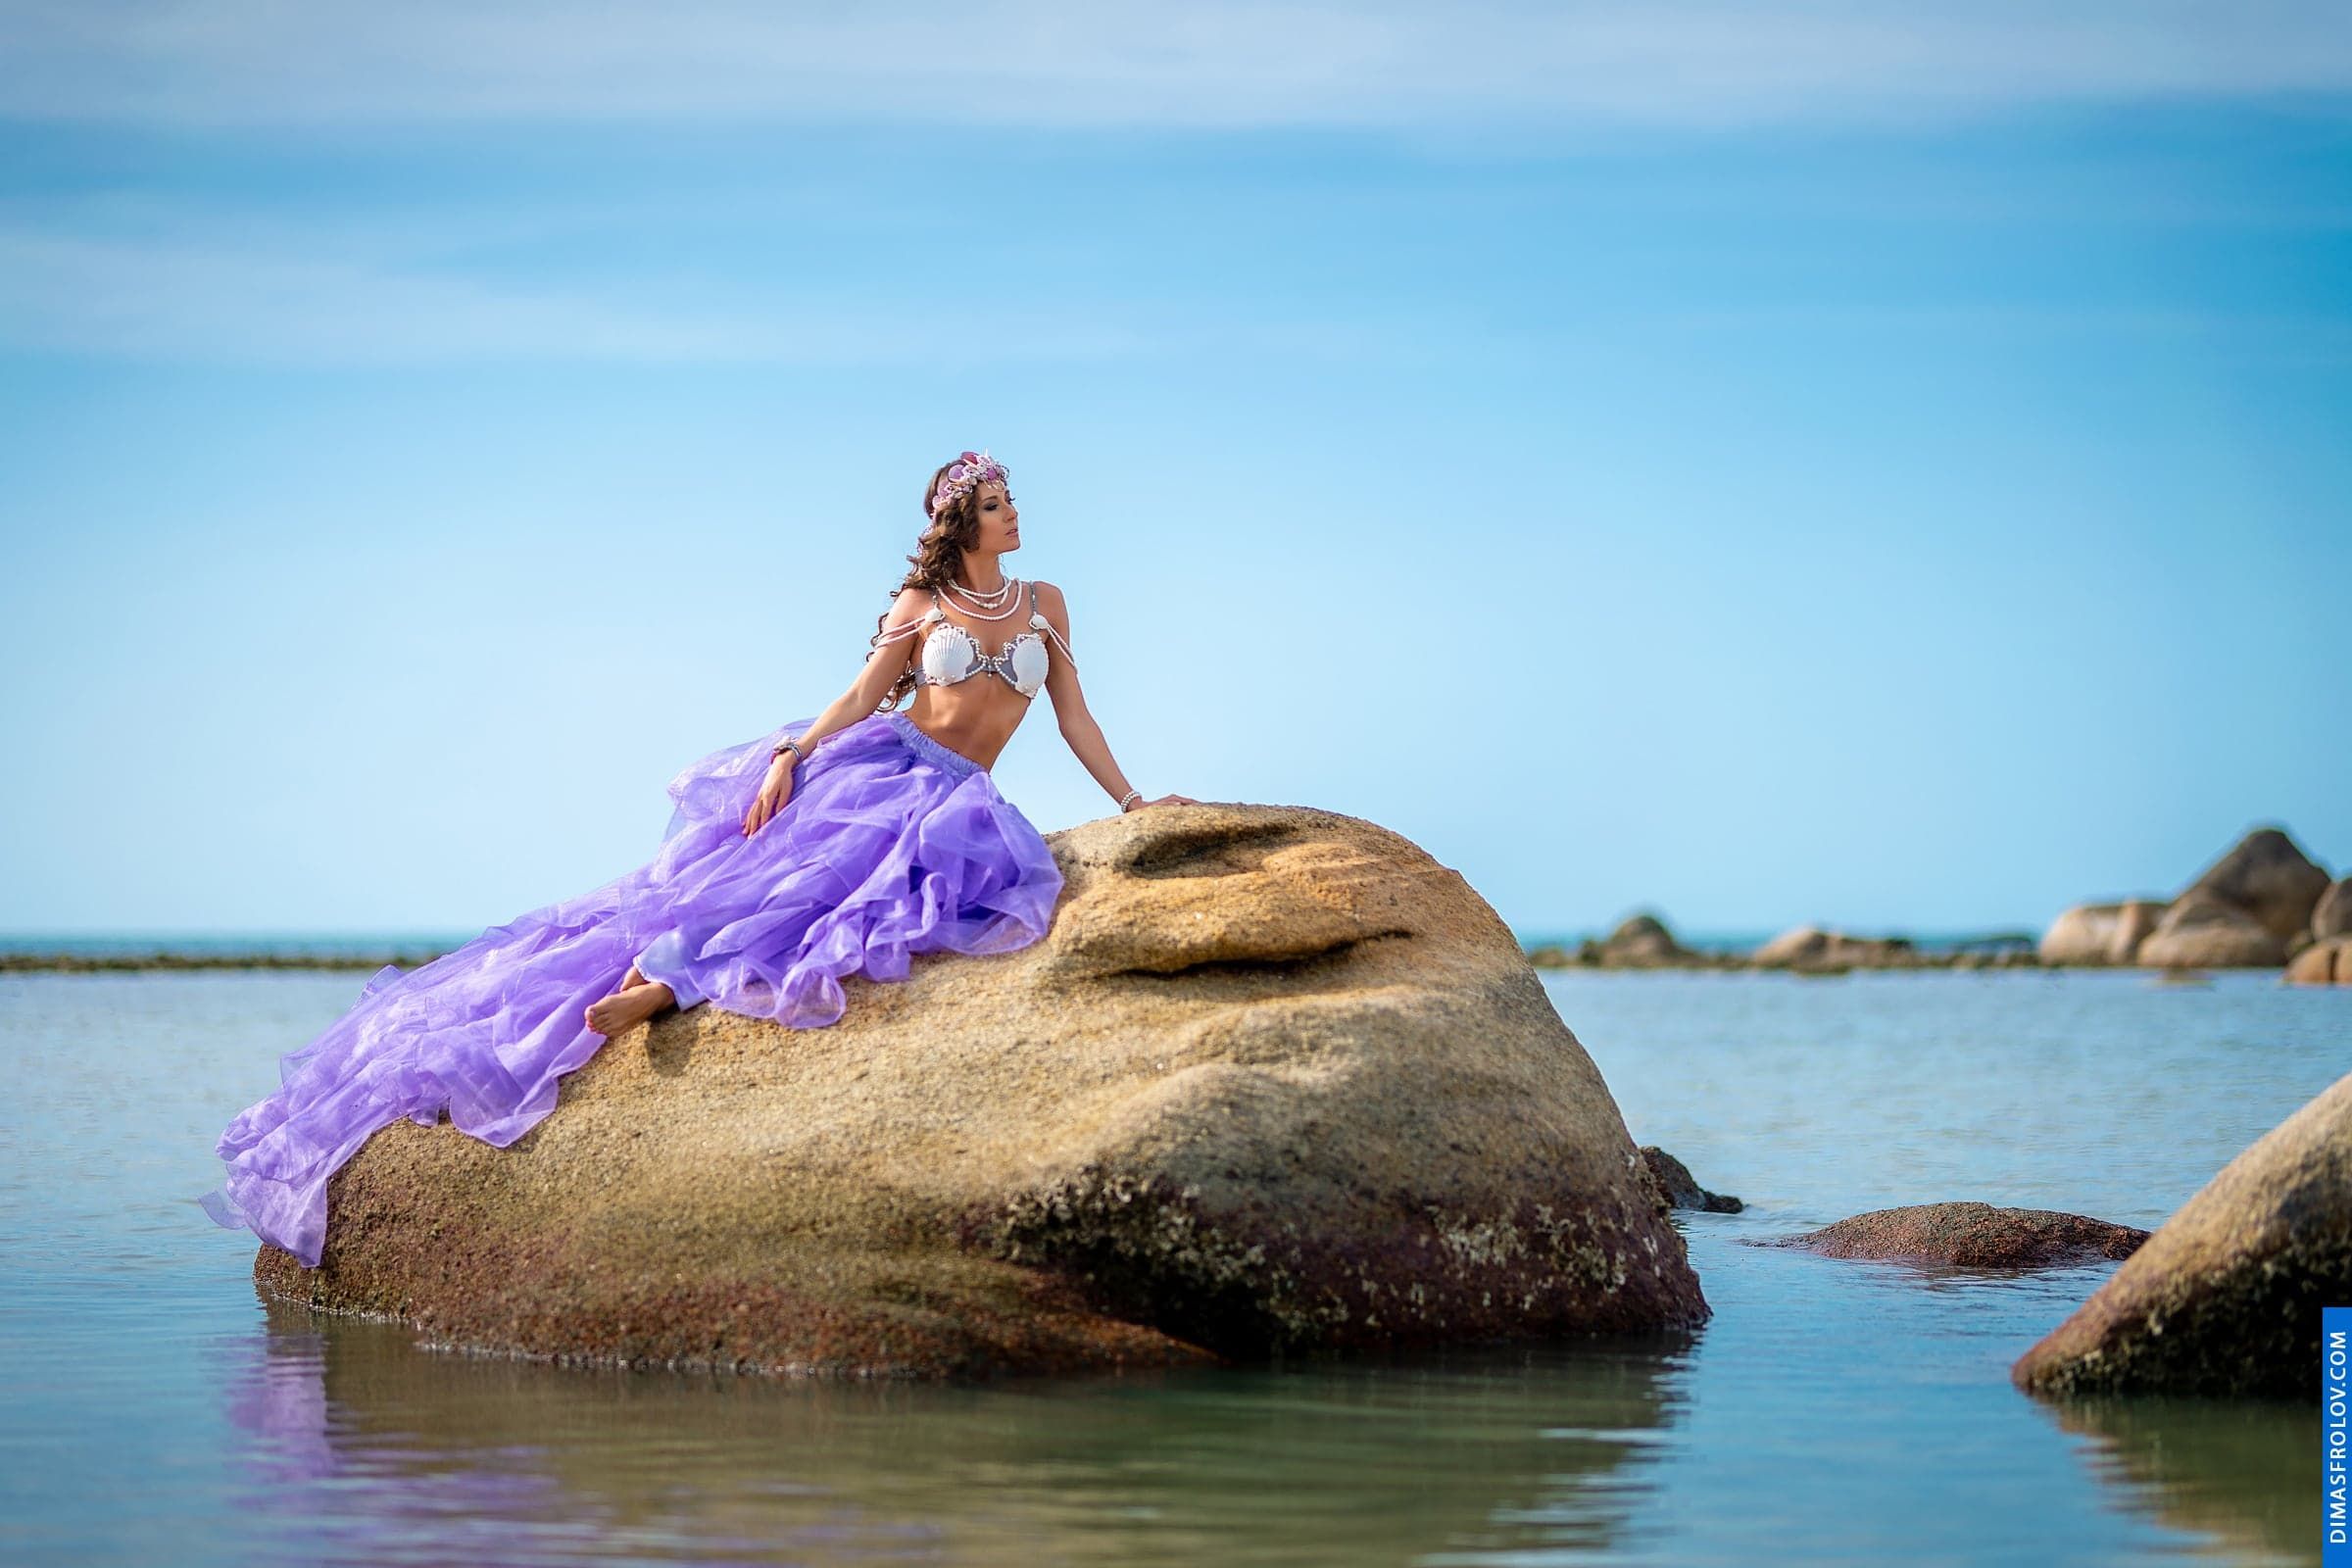 Unique shell accessories for a themed photo shoot on Koh Samui. photographer Dimas Frolov. photo1575